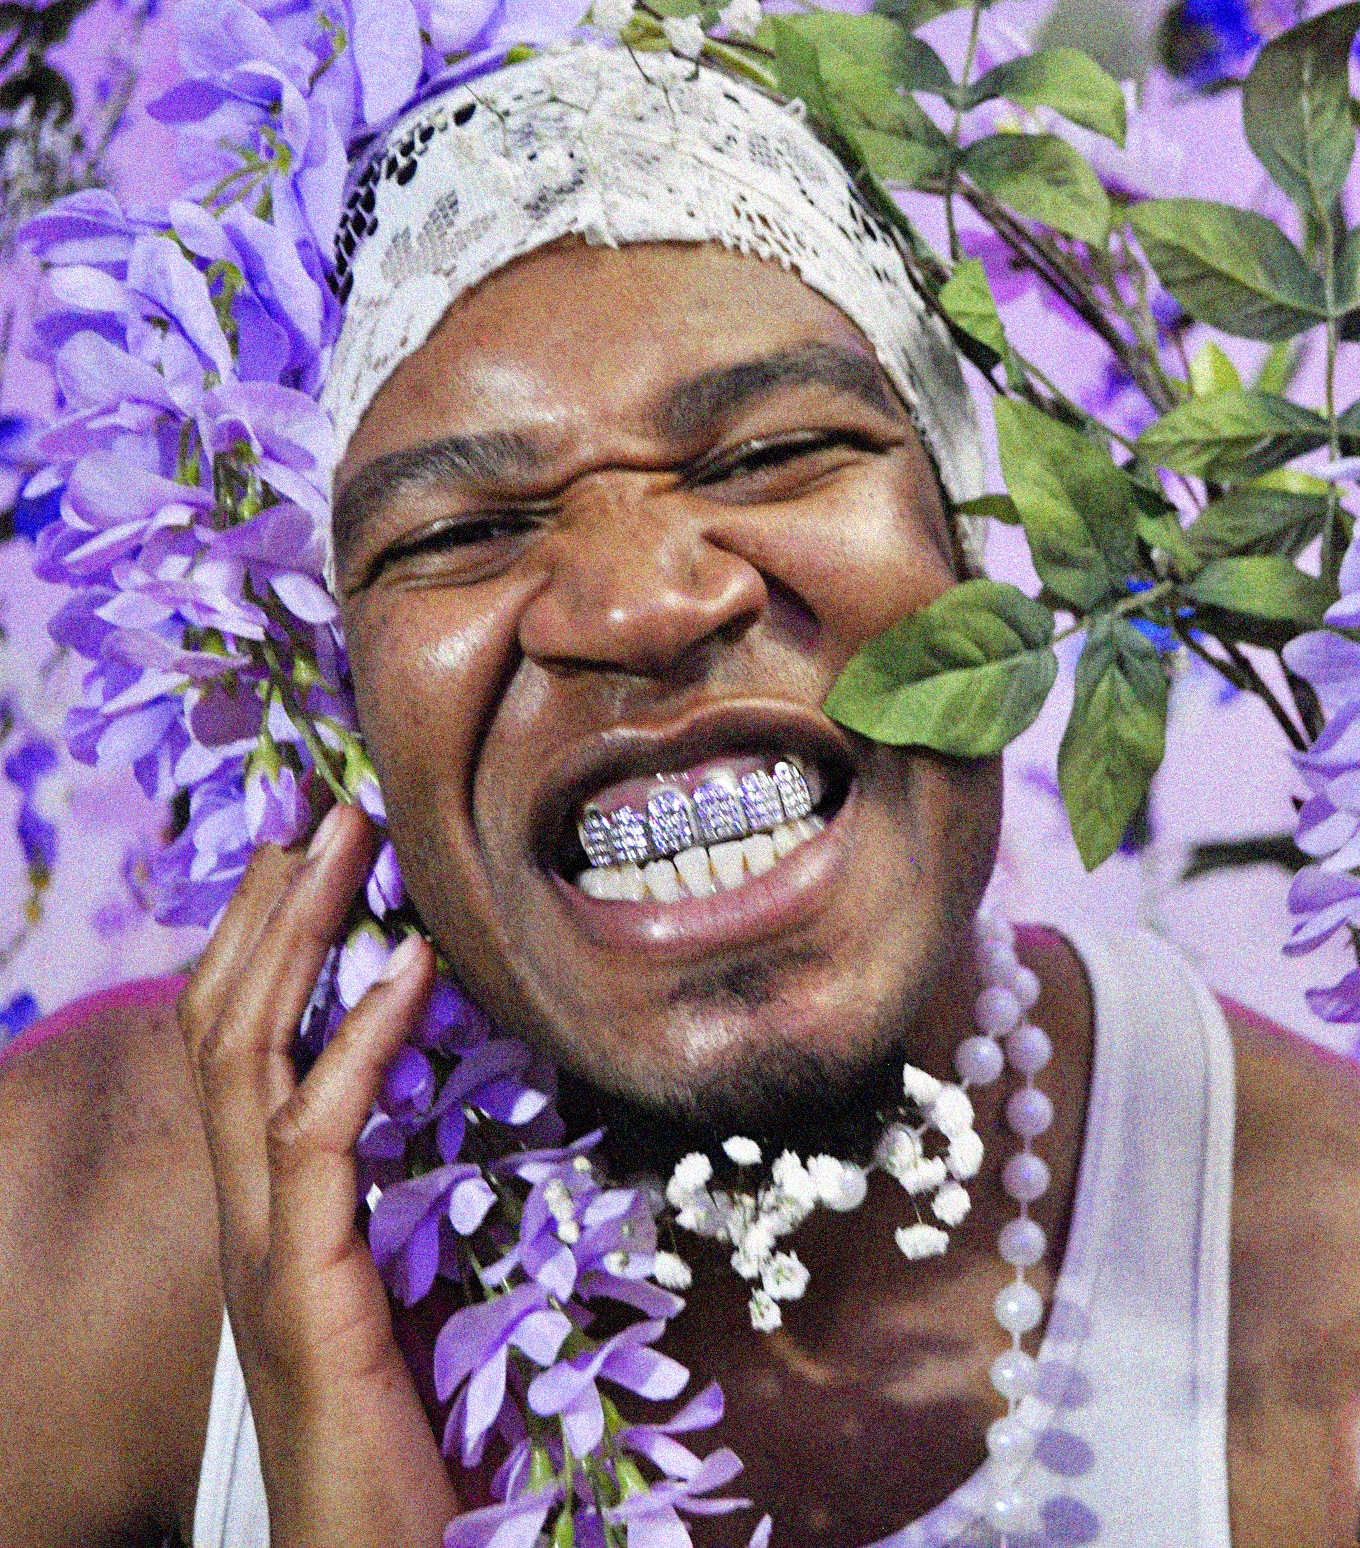 A portrait of Tyriq, wearing a white tank top and what looks like a lace headband, surrounded by purple flowers and greenery. All of Tyriq’s teeth are showing, and it appears as though there is purple jewels on his teeth. 